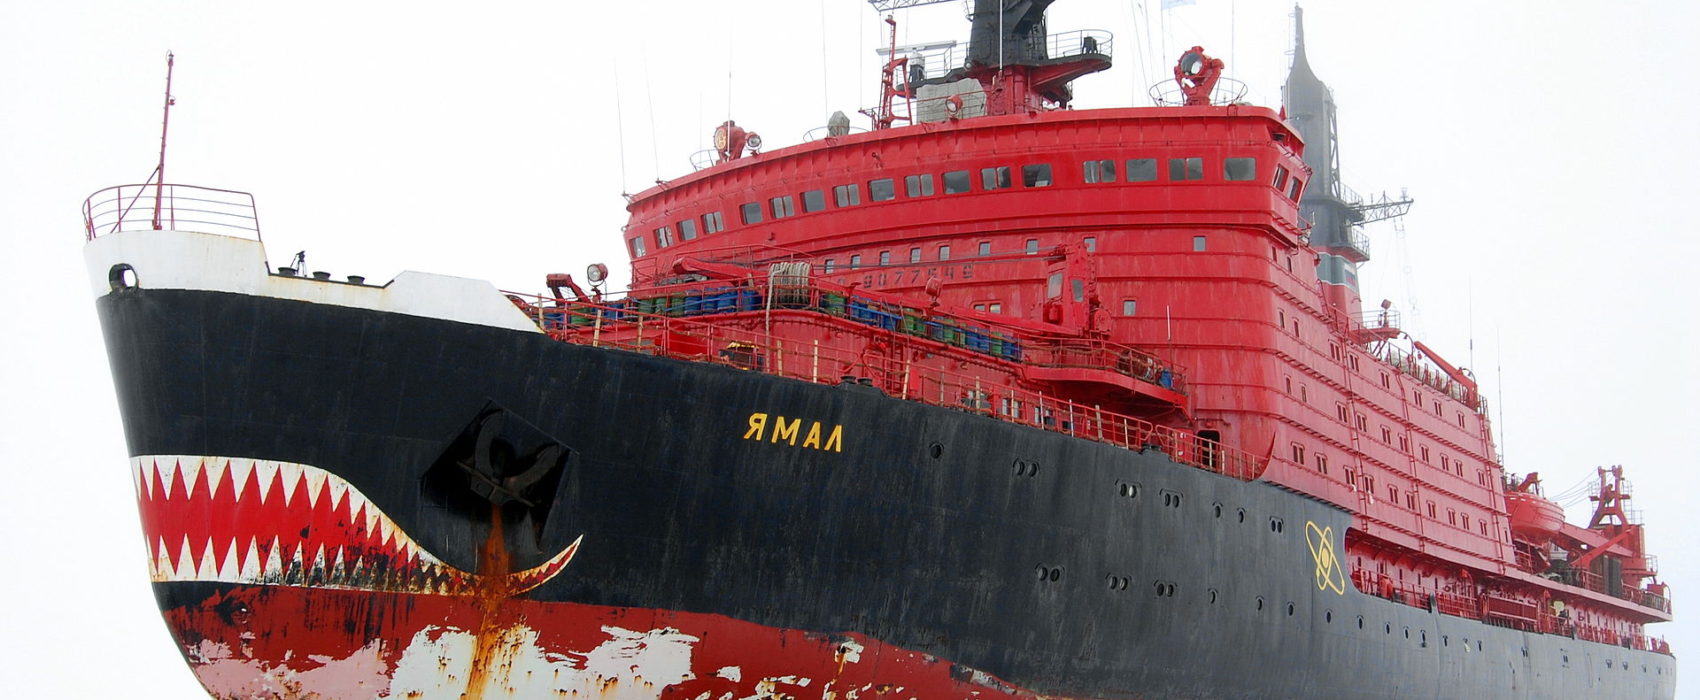 Icebreaker Yamal during removal of manned drifting station North Pole-36. August 2009. (Creative Commons photo by Pink floyd88)